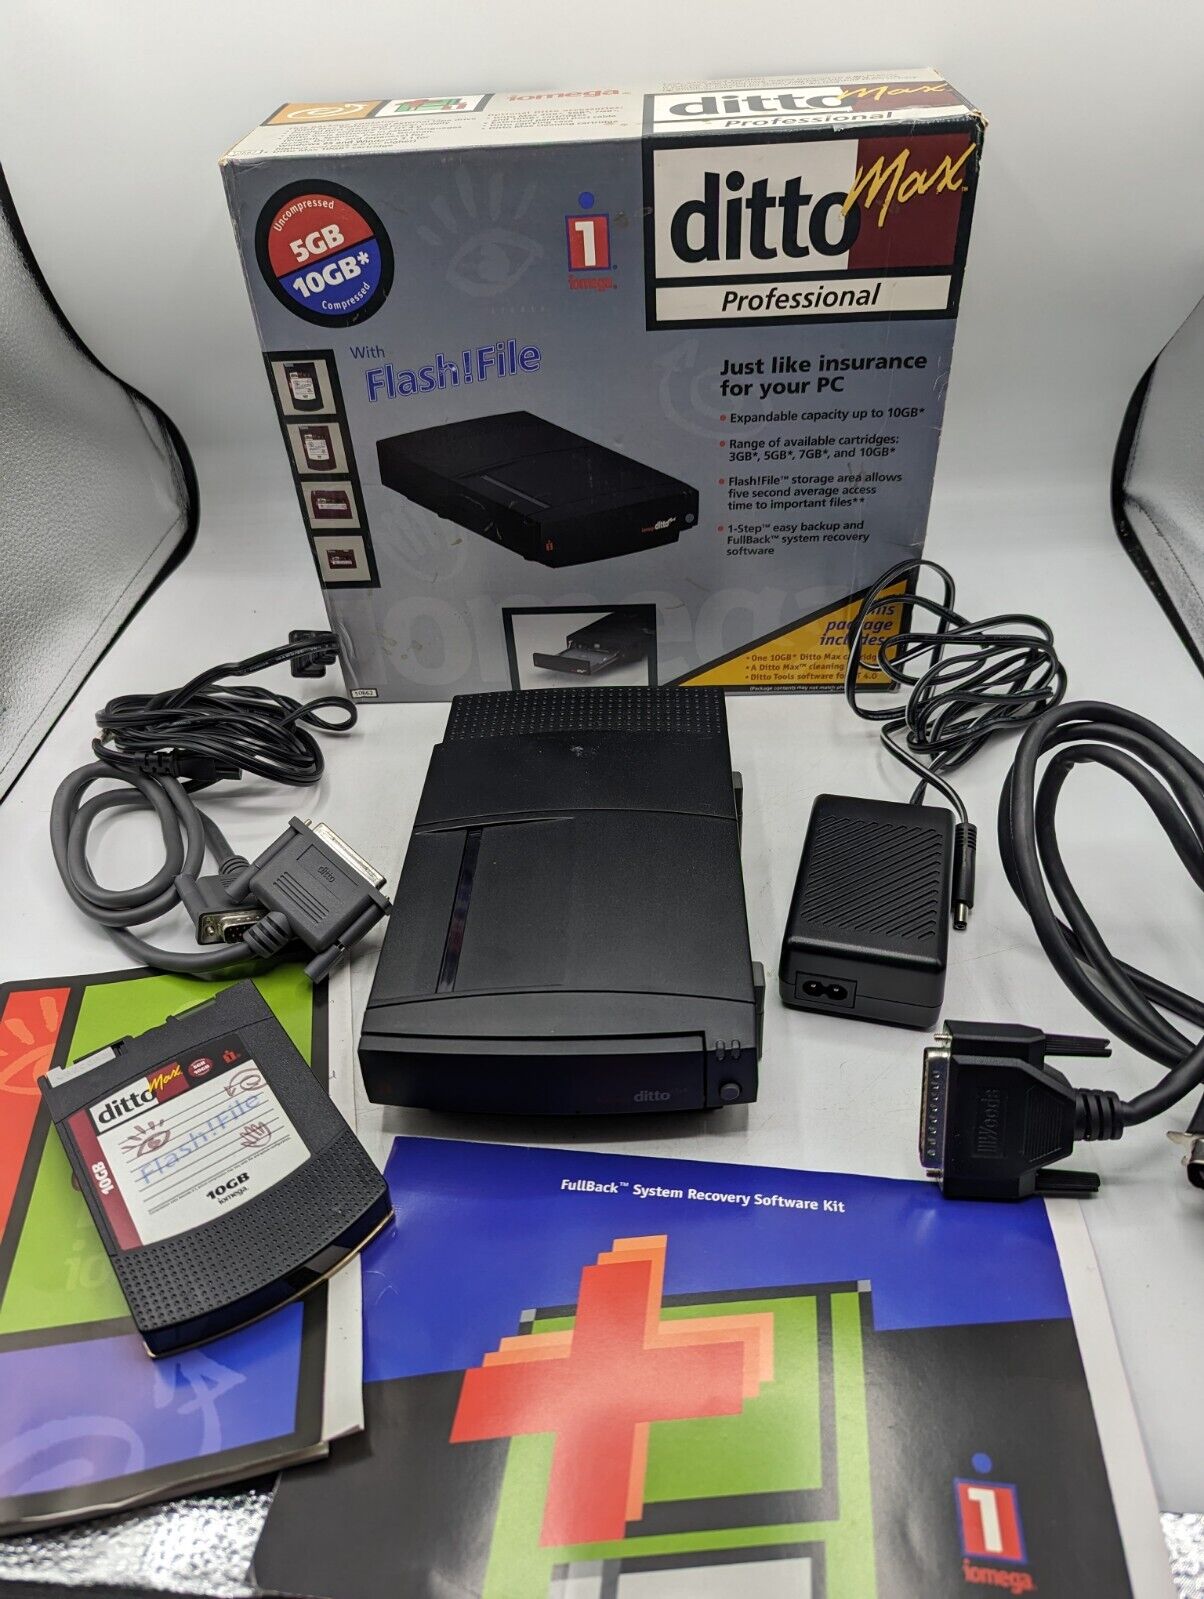 Iomega Ditto Max Professional External Tape Drive with Box and 10GB Cartridge